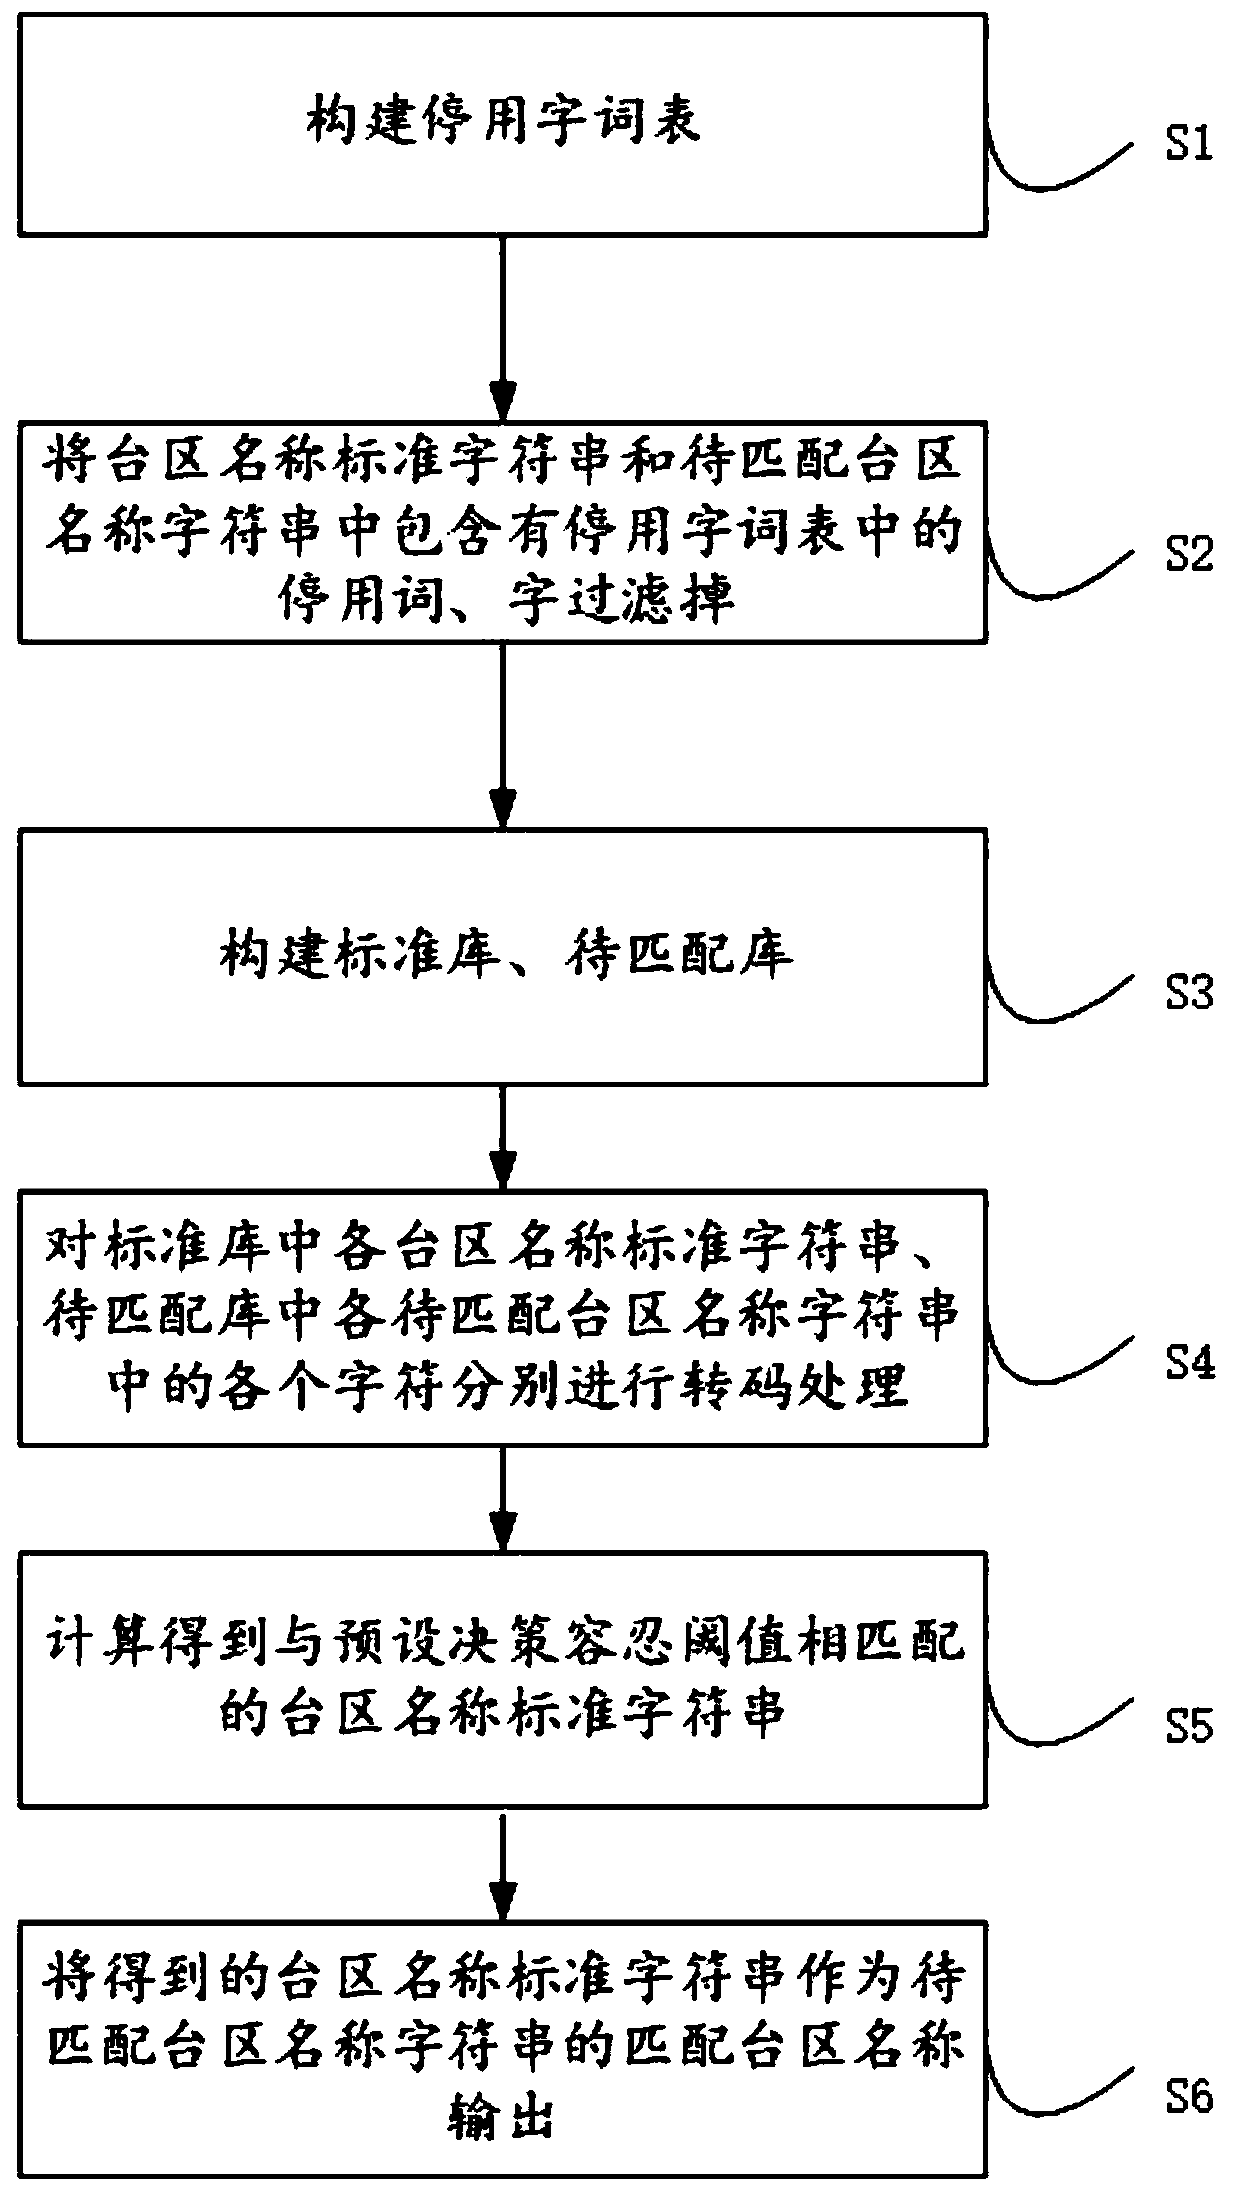 A low-voltage power distribution network district name similarity matching method and system